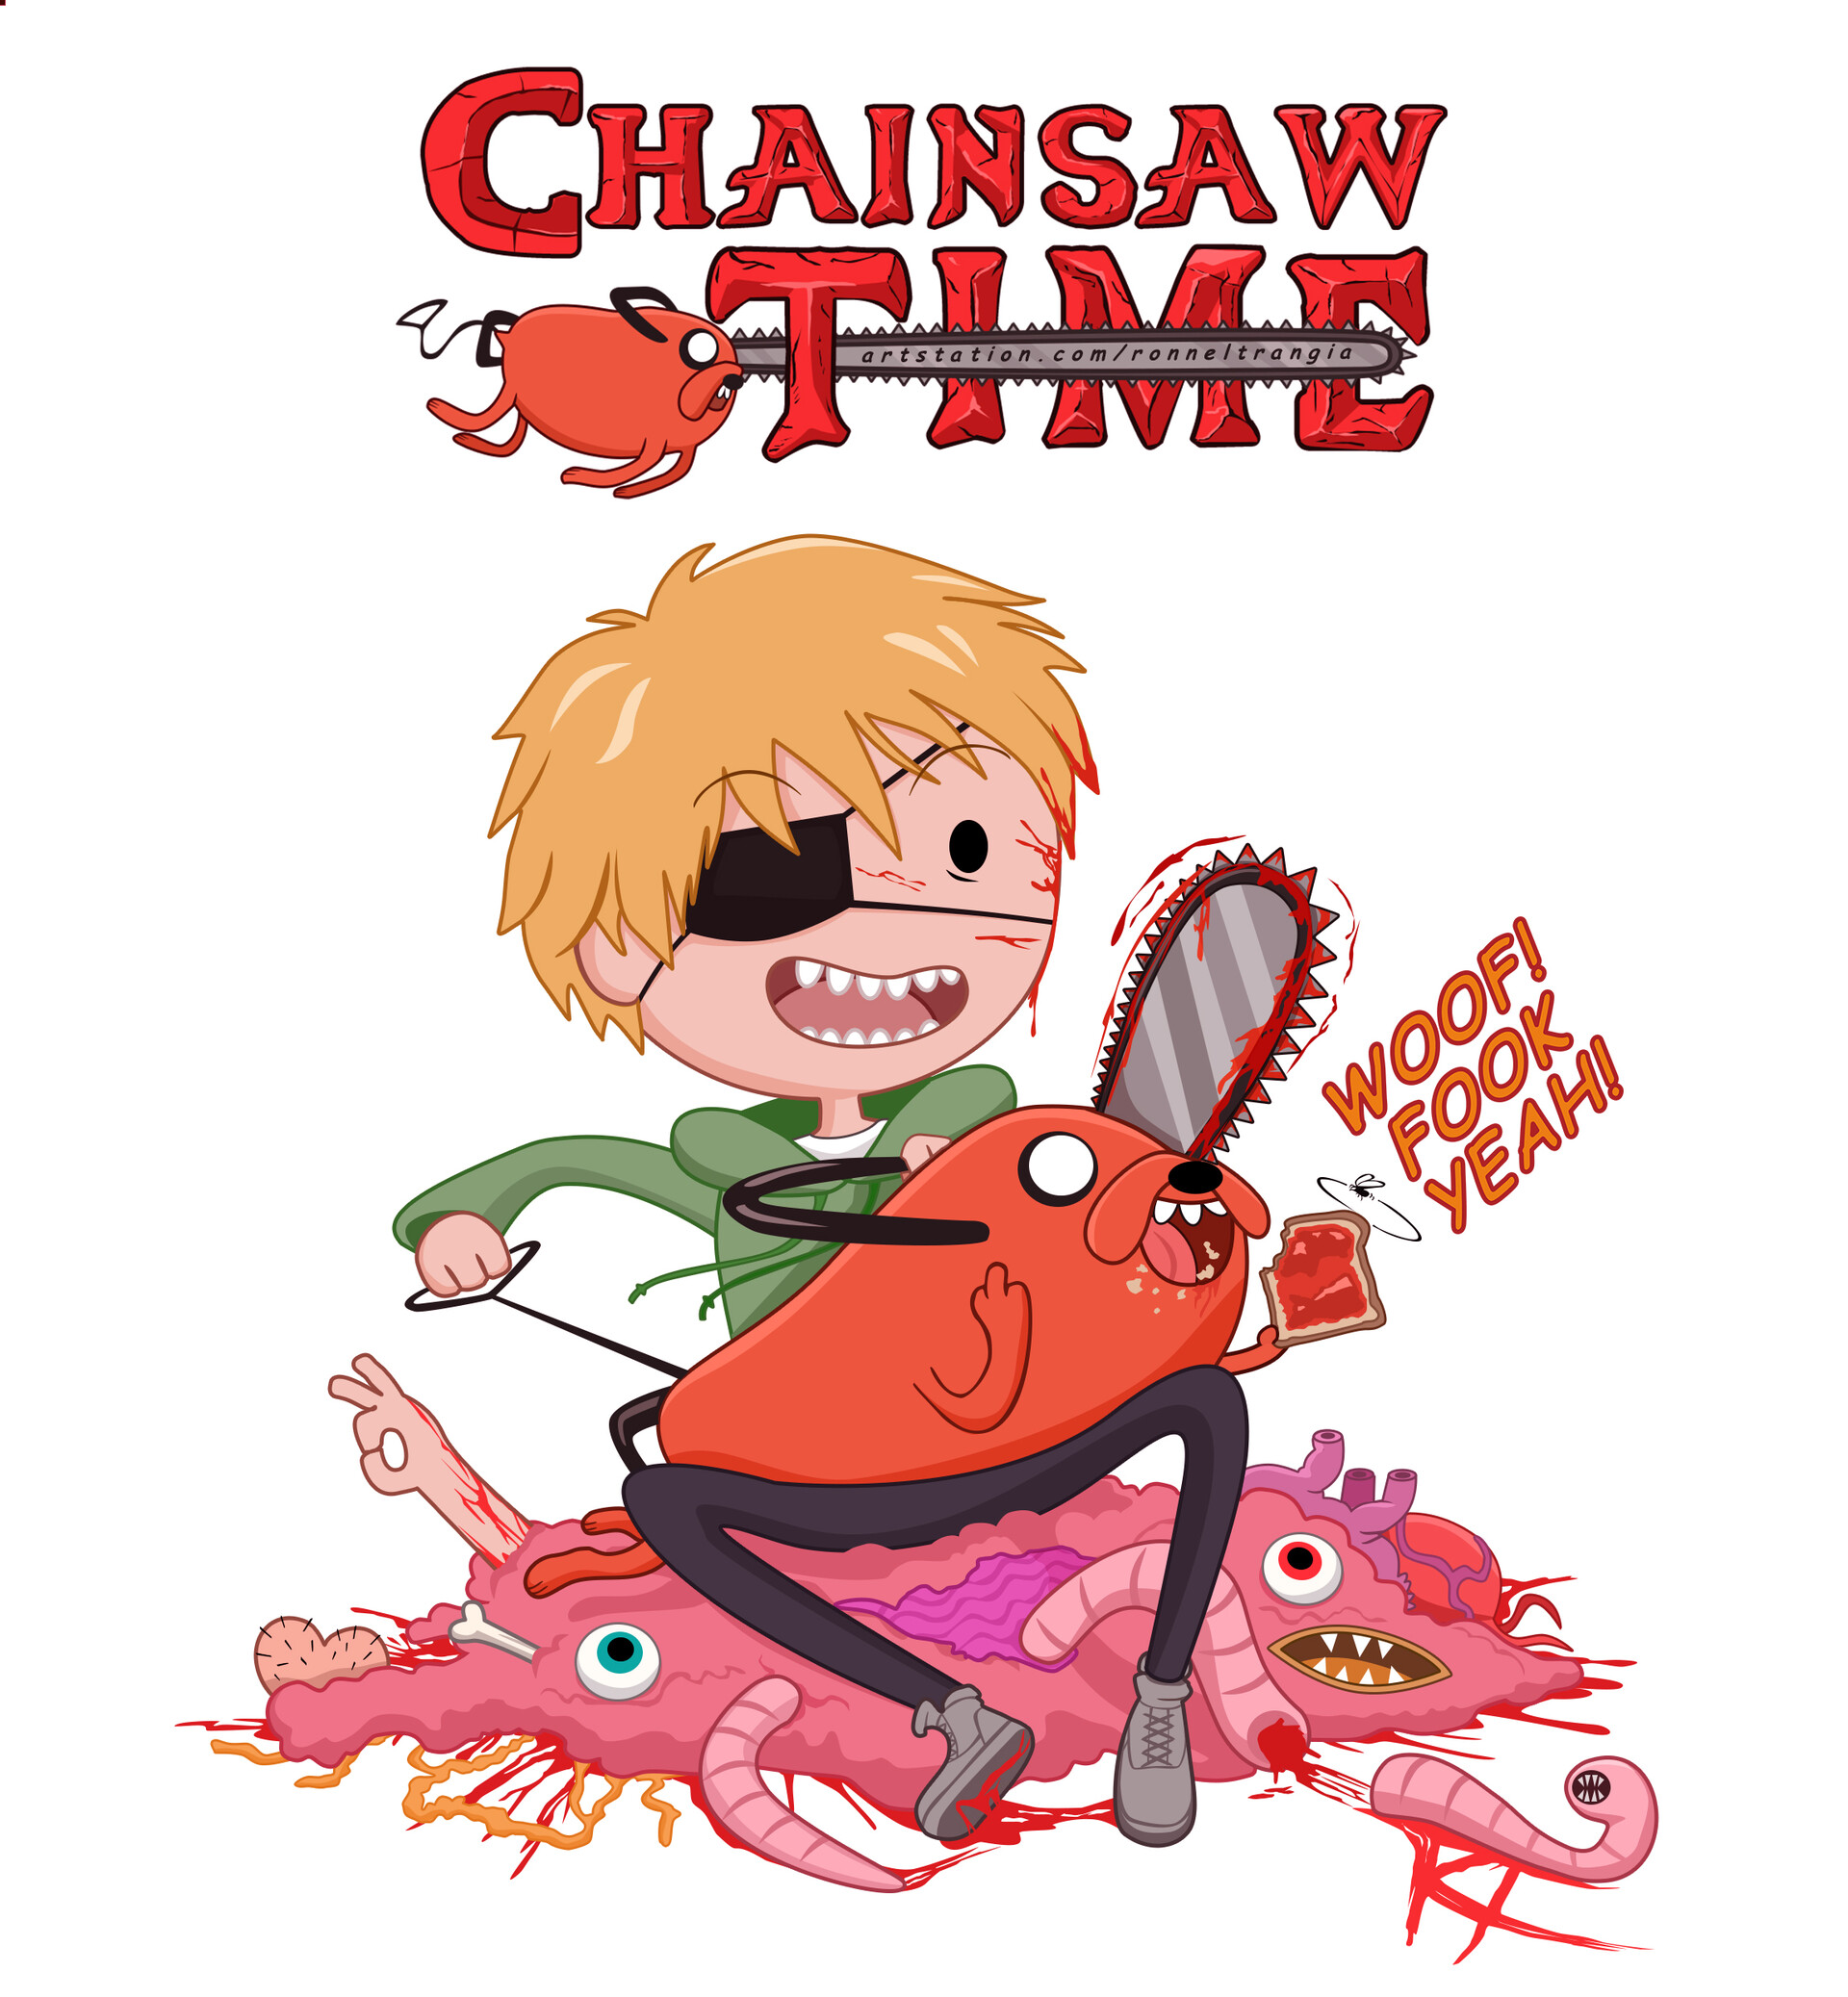 Adventure Time Crossover Illustration Pays Homage to Chainsaw Man